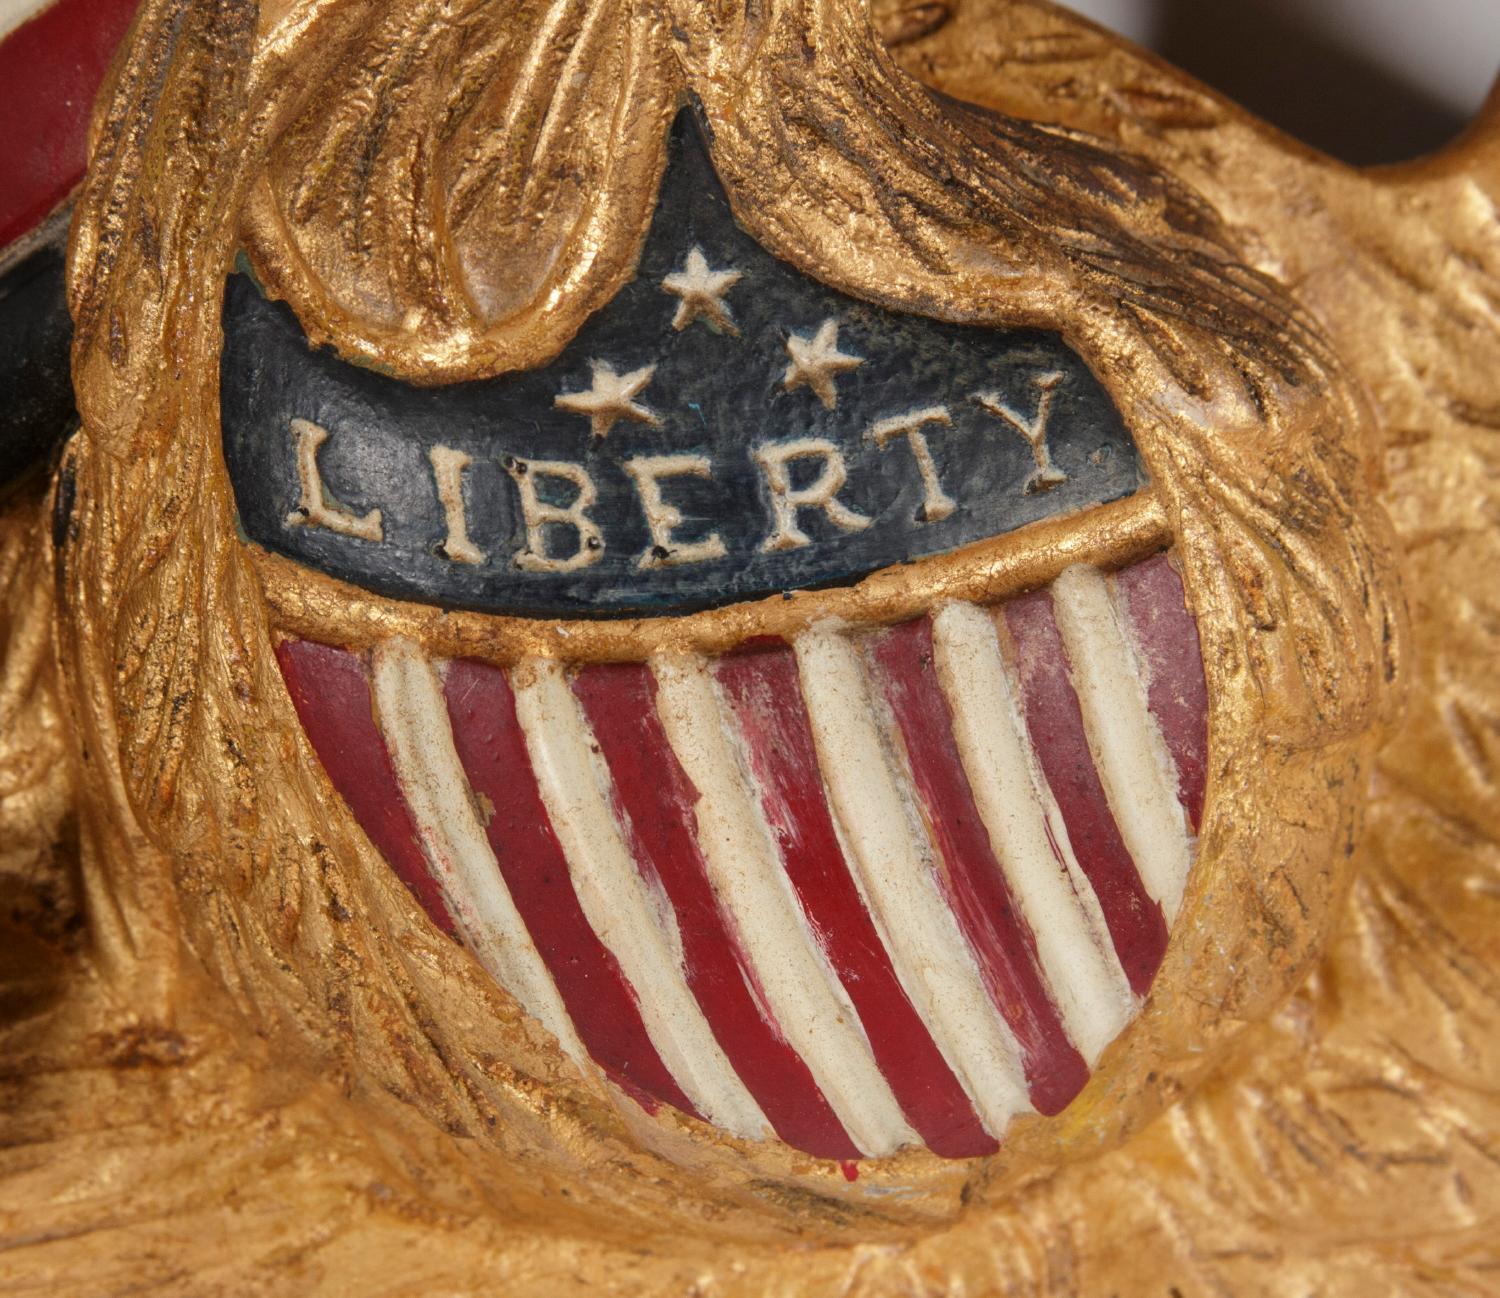 CARVED EAGLE BY GEORGE STAPF, HARRISBURG, PENNSYLVANIA, AN UNUSUALLY FINE EXAMPLE WITH A STAR IN ITS BEAK AND A SHIELD IN RELIEF ON ITS BREAST WITH THE WORD 